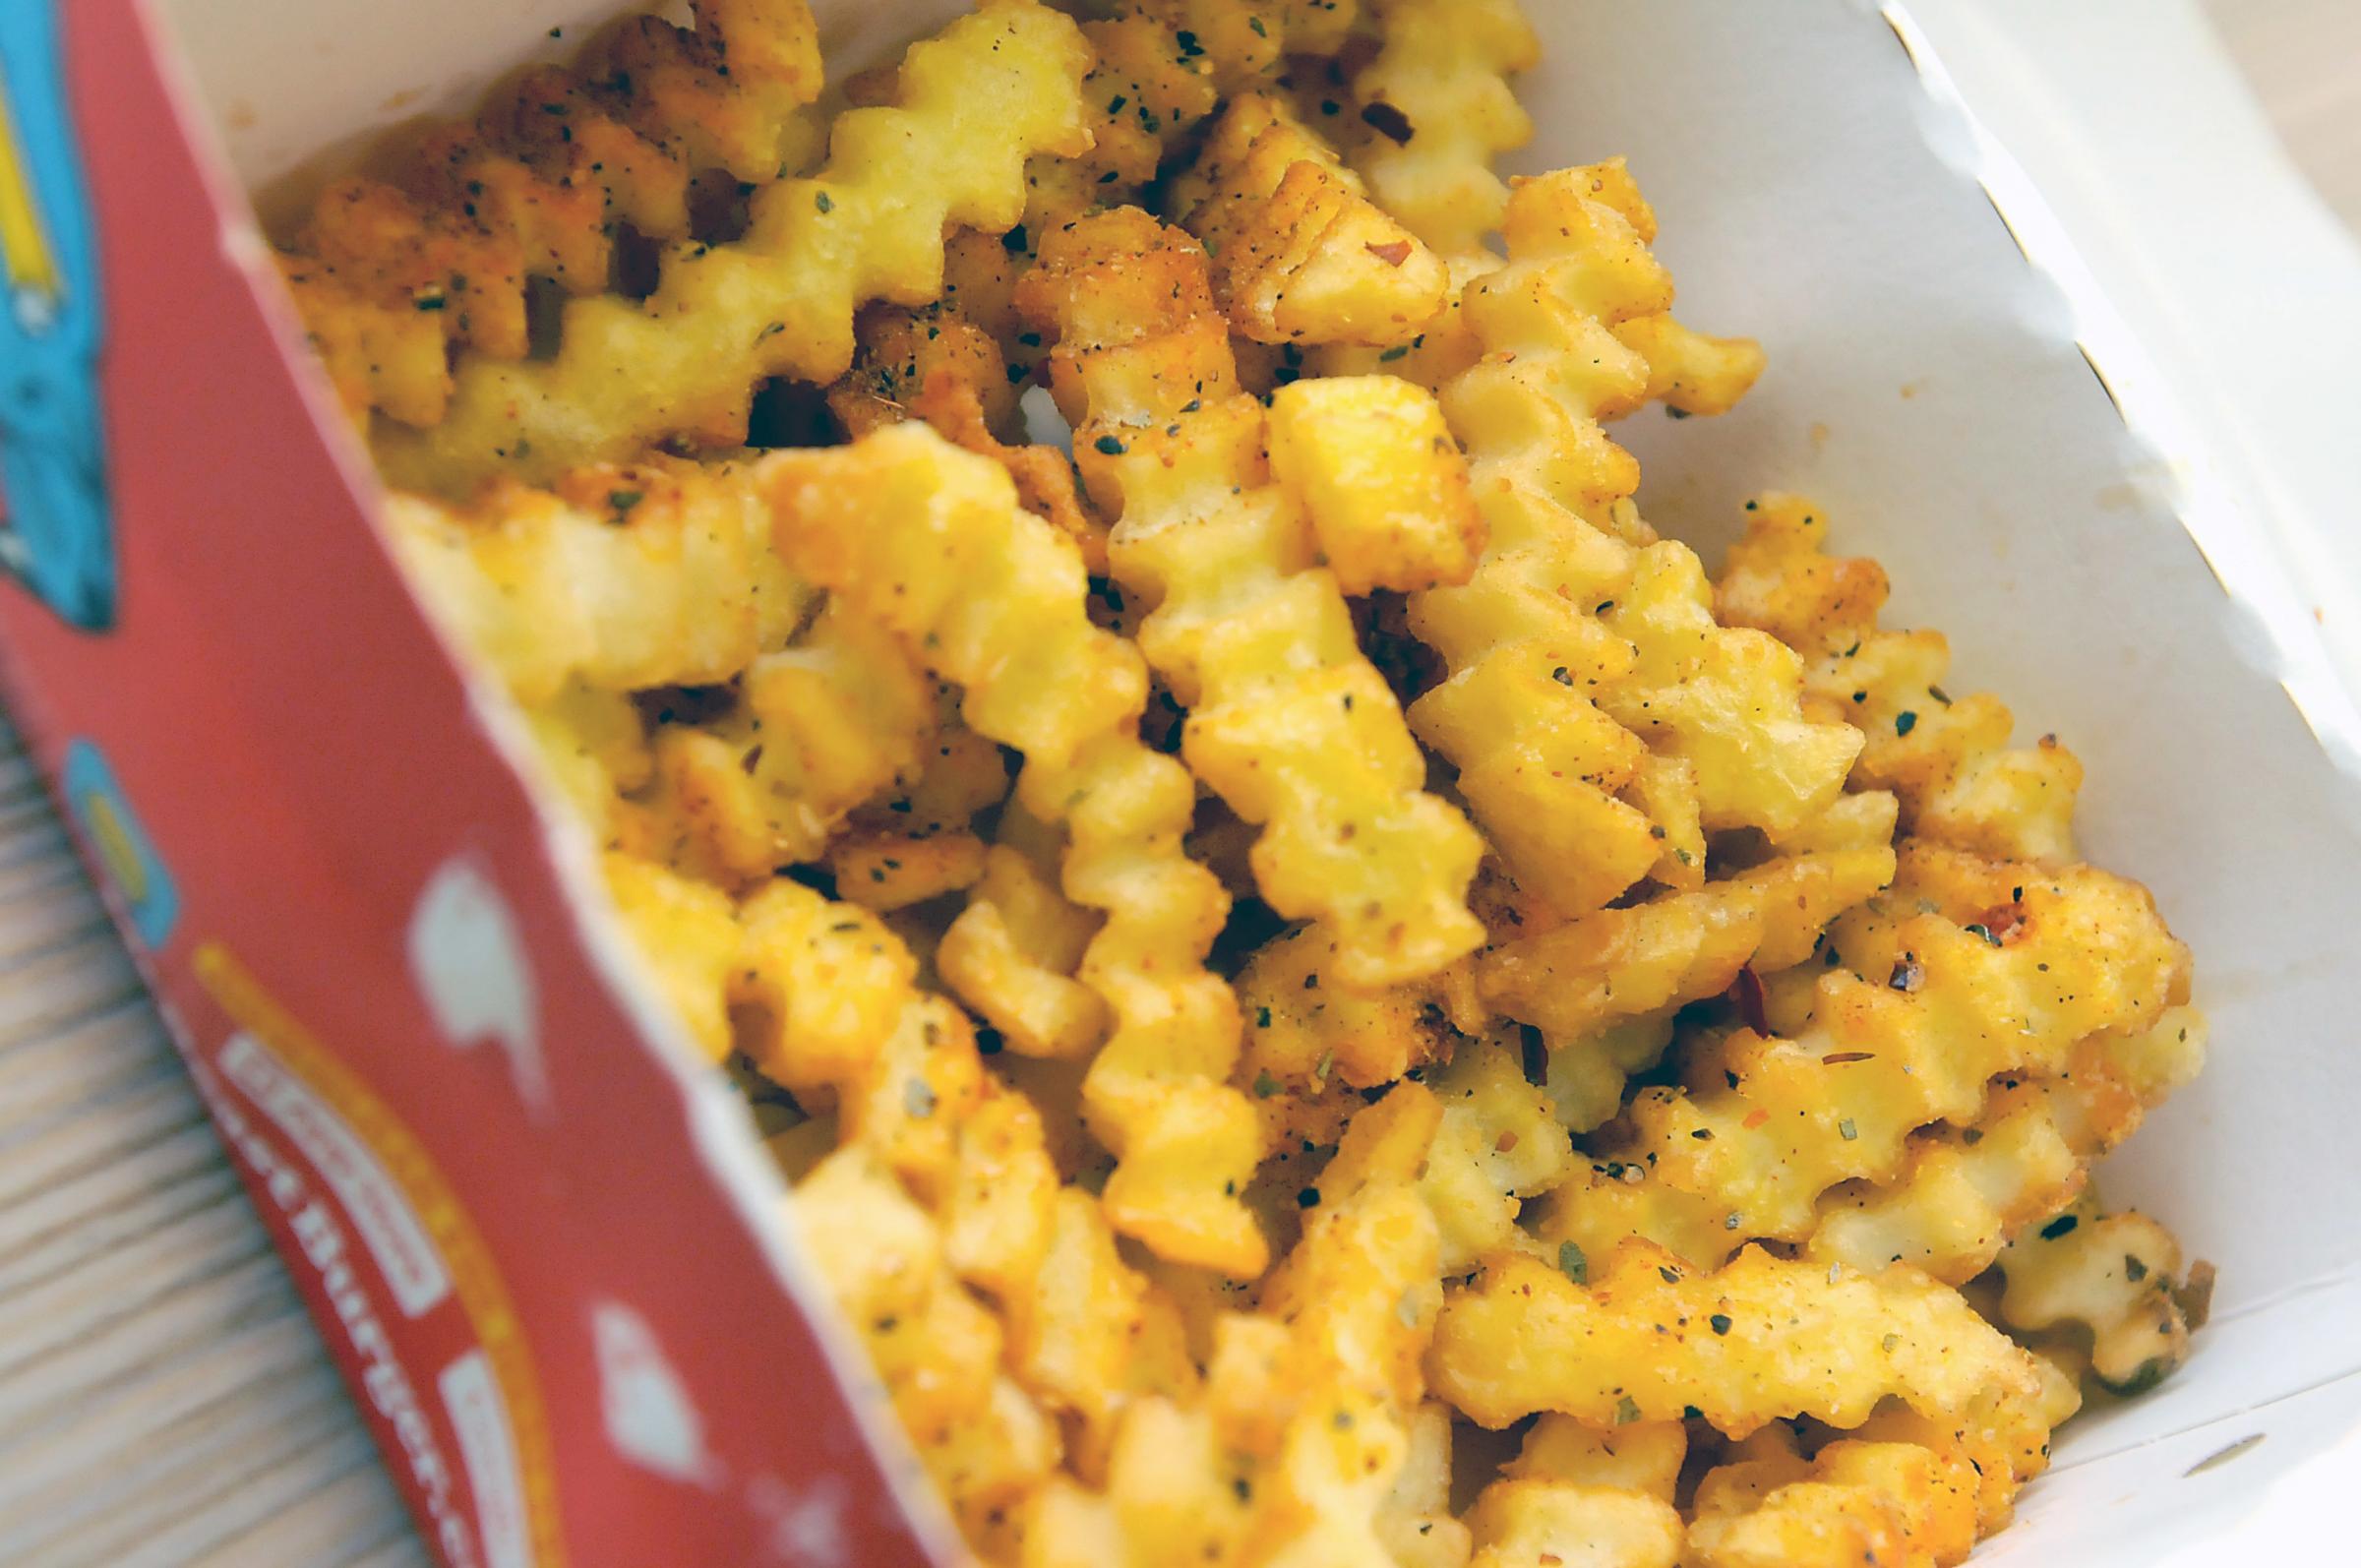 Seasoned Crinkle Fries are a must as a side dish